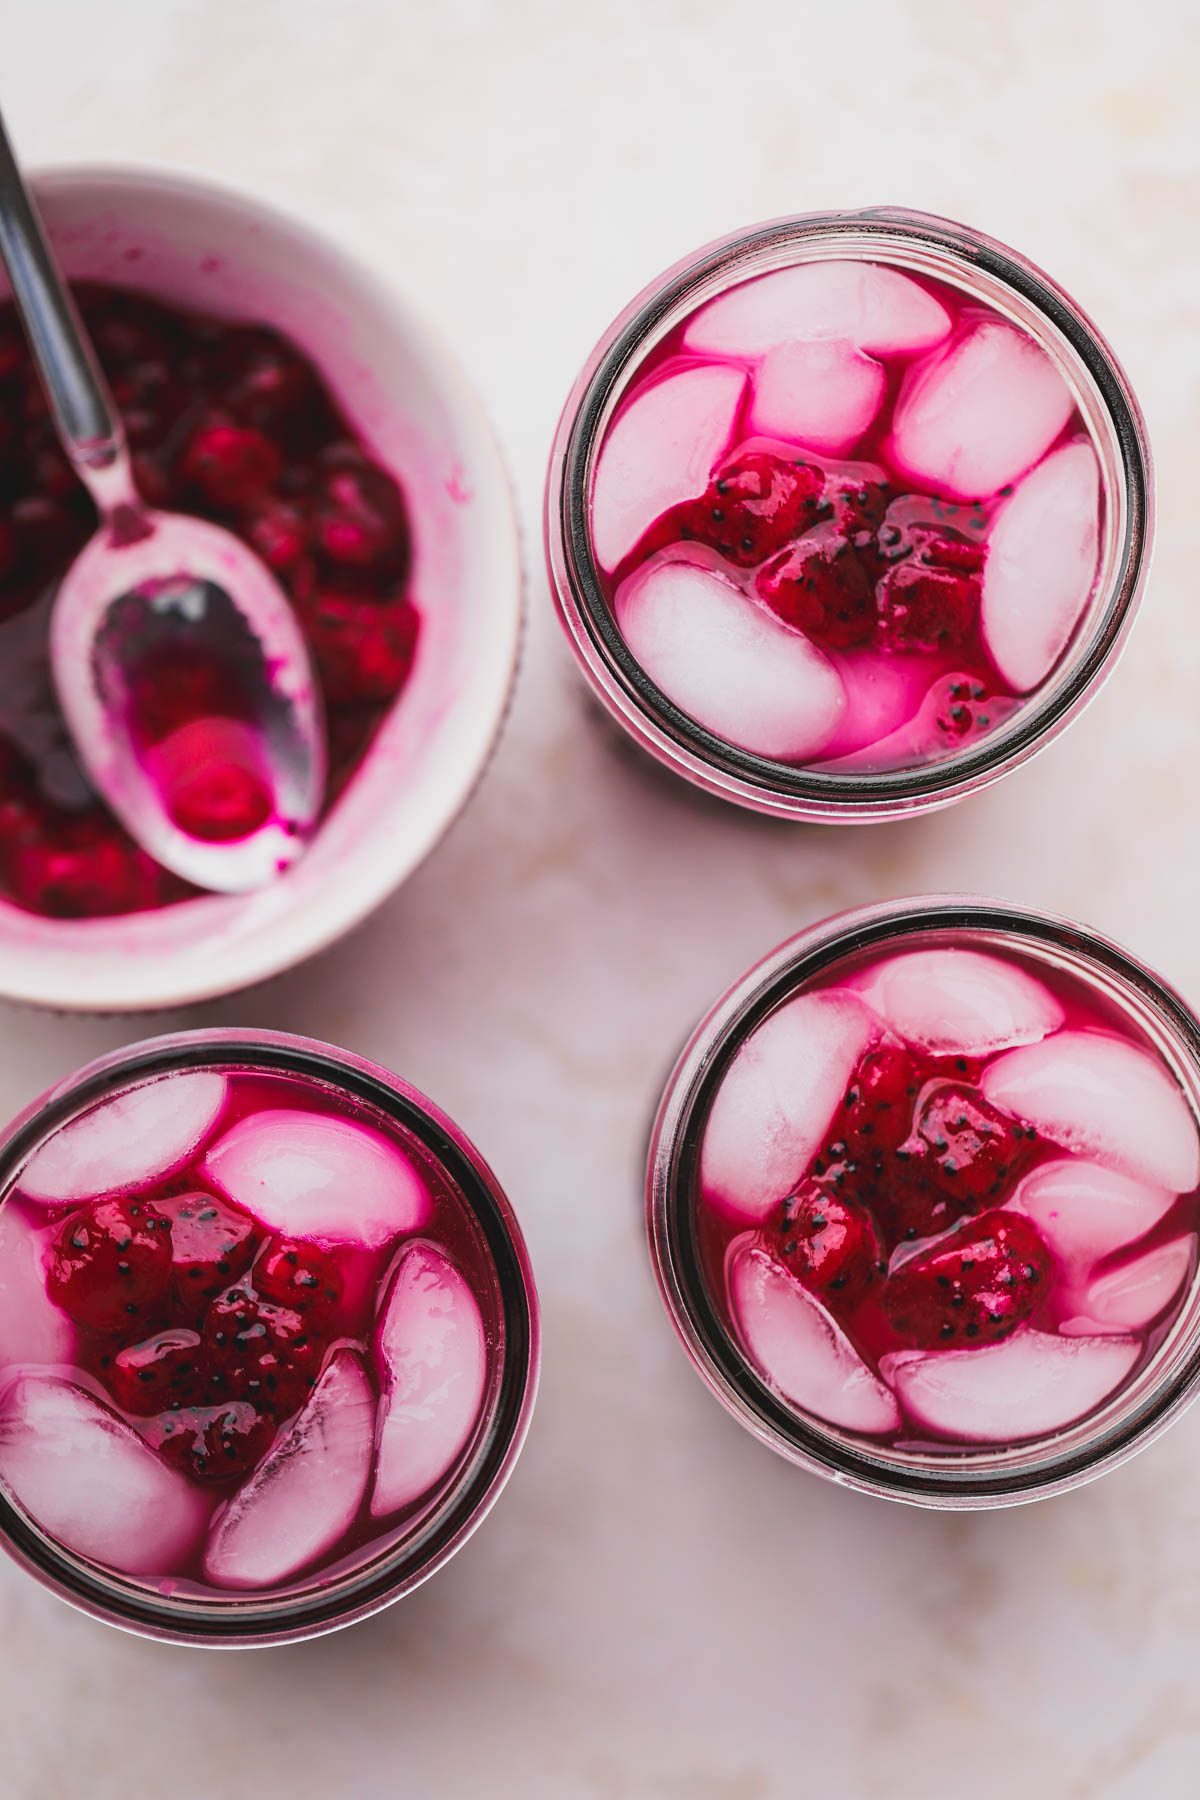 Dragon fruit lemonade topped with crushed dragon fruit and ice cubes.  